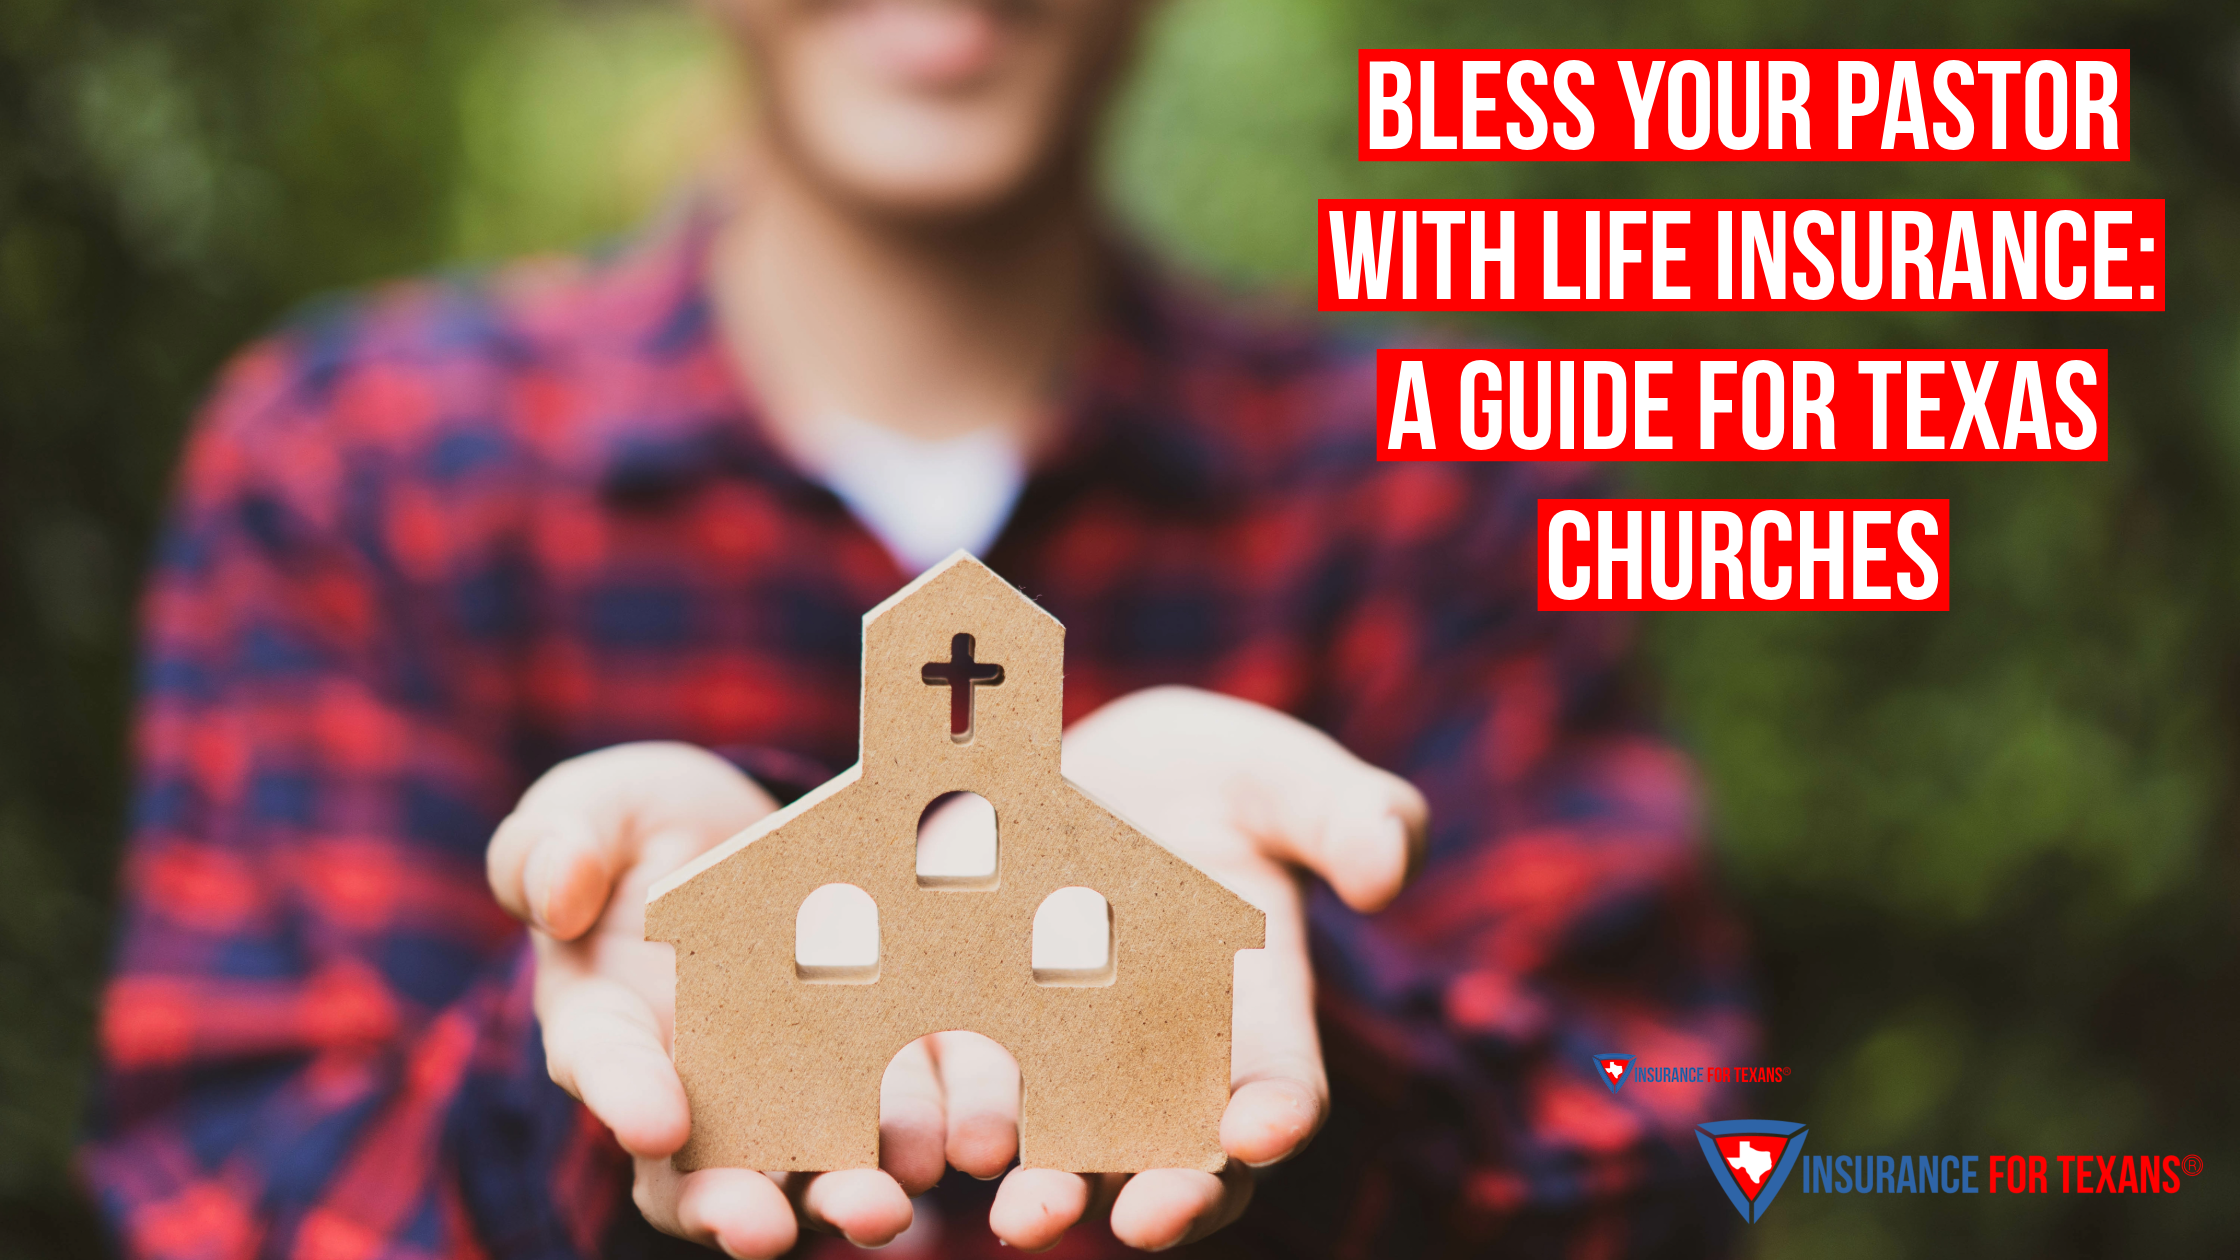 Bless Your Pastor with Life Insurance: A Guide for Texas Churches